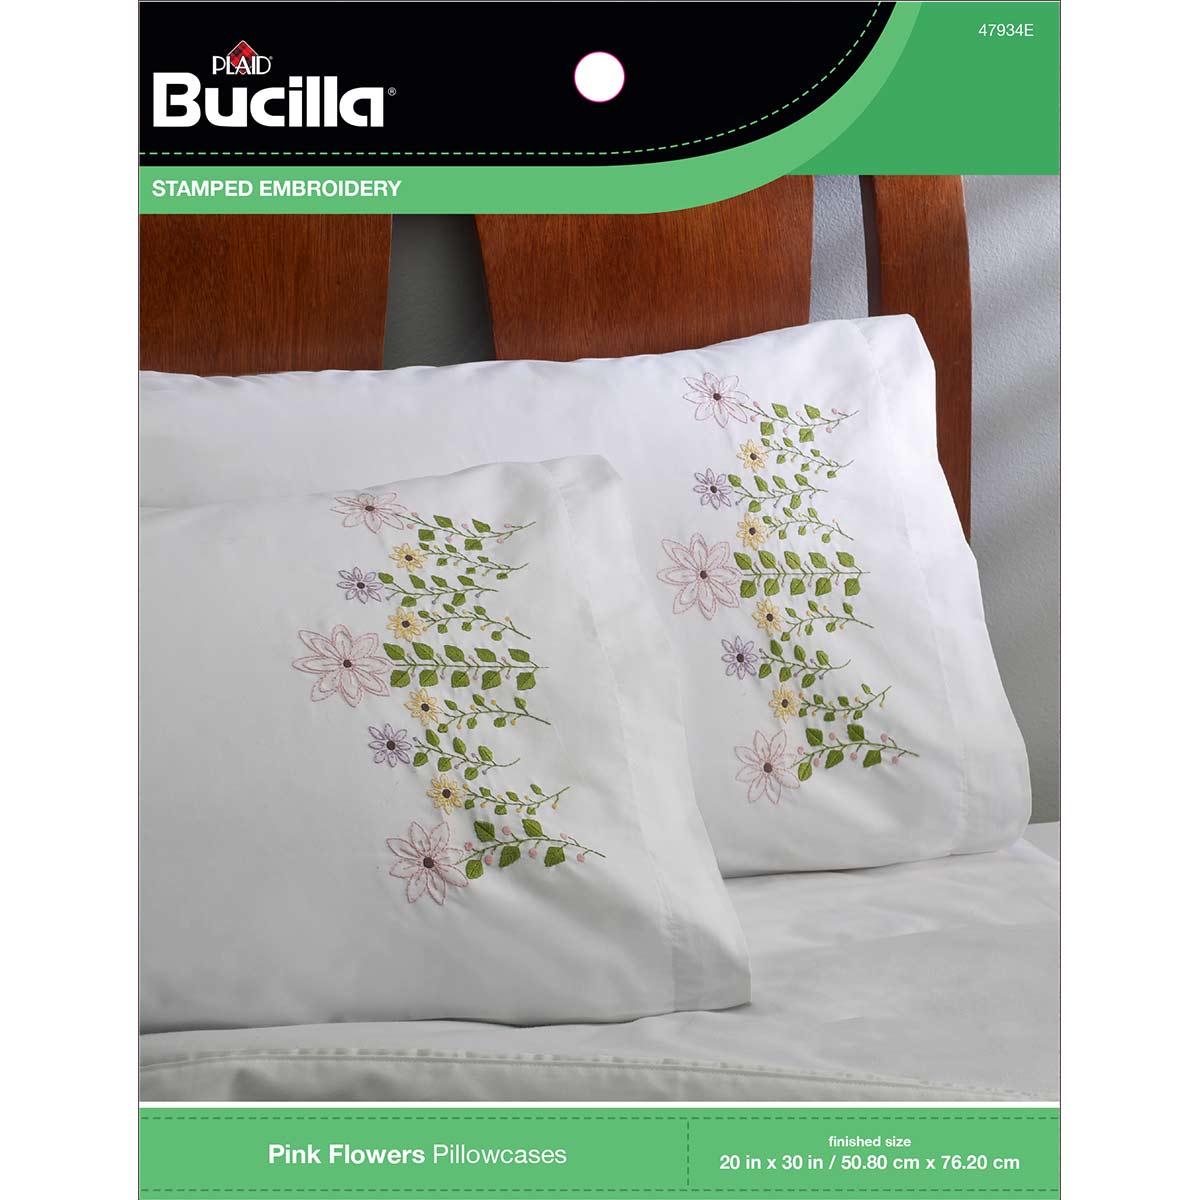 Bucilla ® Stamped Cross Stitch & Embroidery - Pillowcase Pairs - Pink Flowers - 47934E